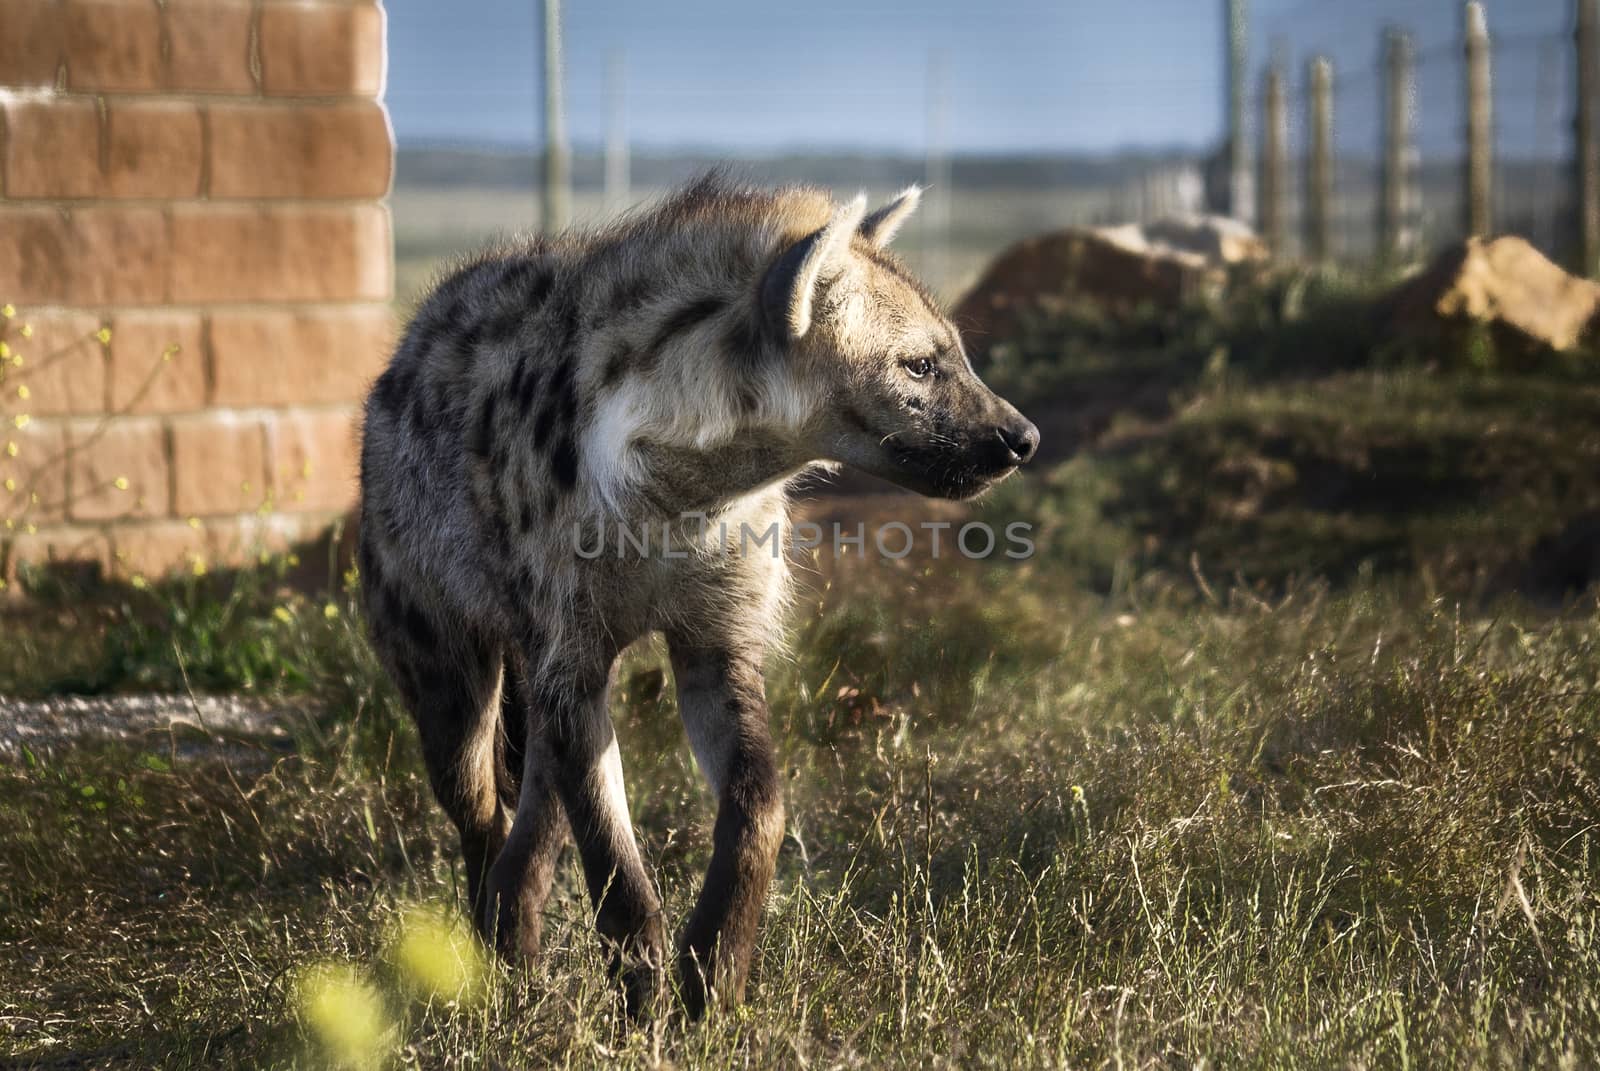 An African painted wild dog (Lycaon pictus) in a wildlife park in South Africa